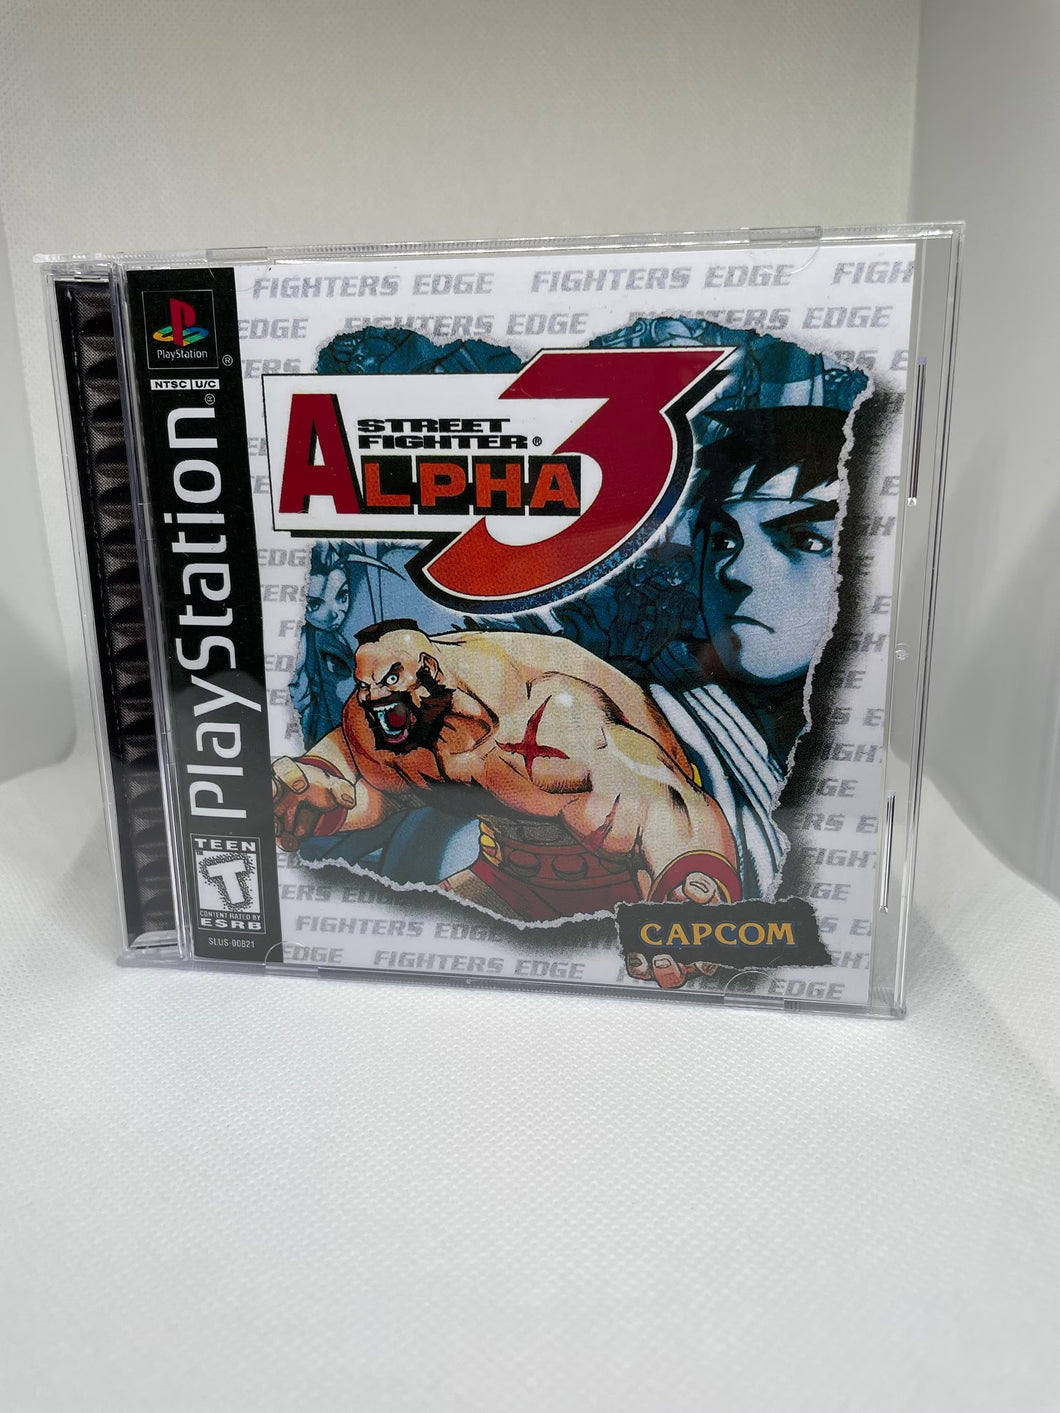 Street Fighter Alpha 3 PS1 Reproduction Case